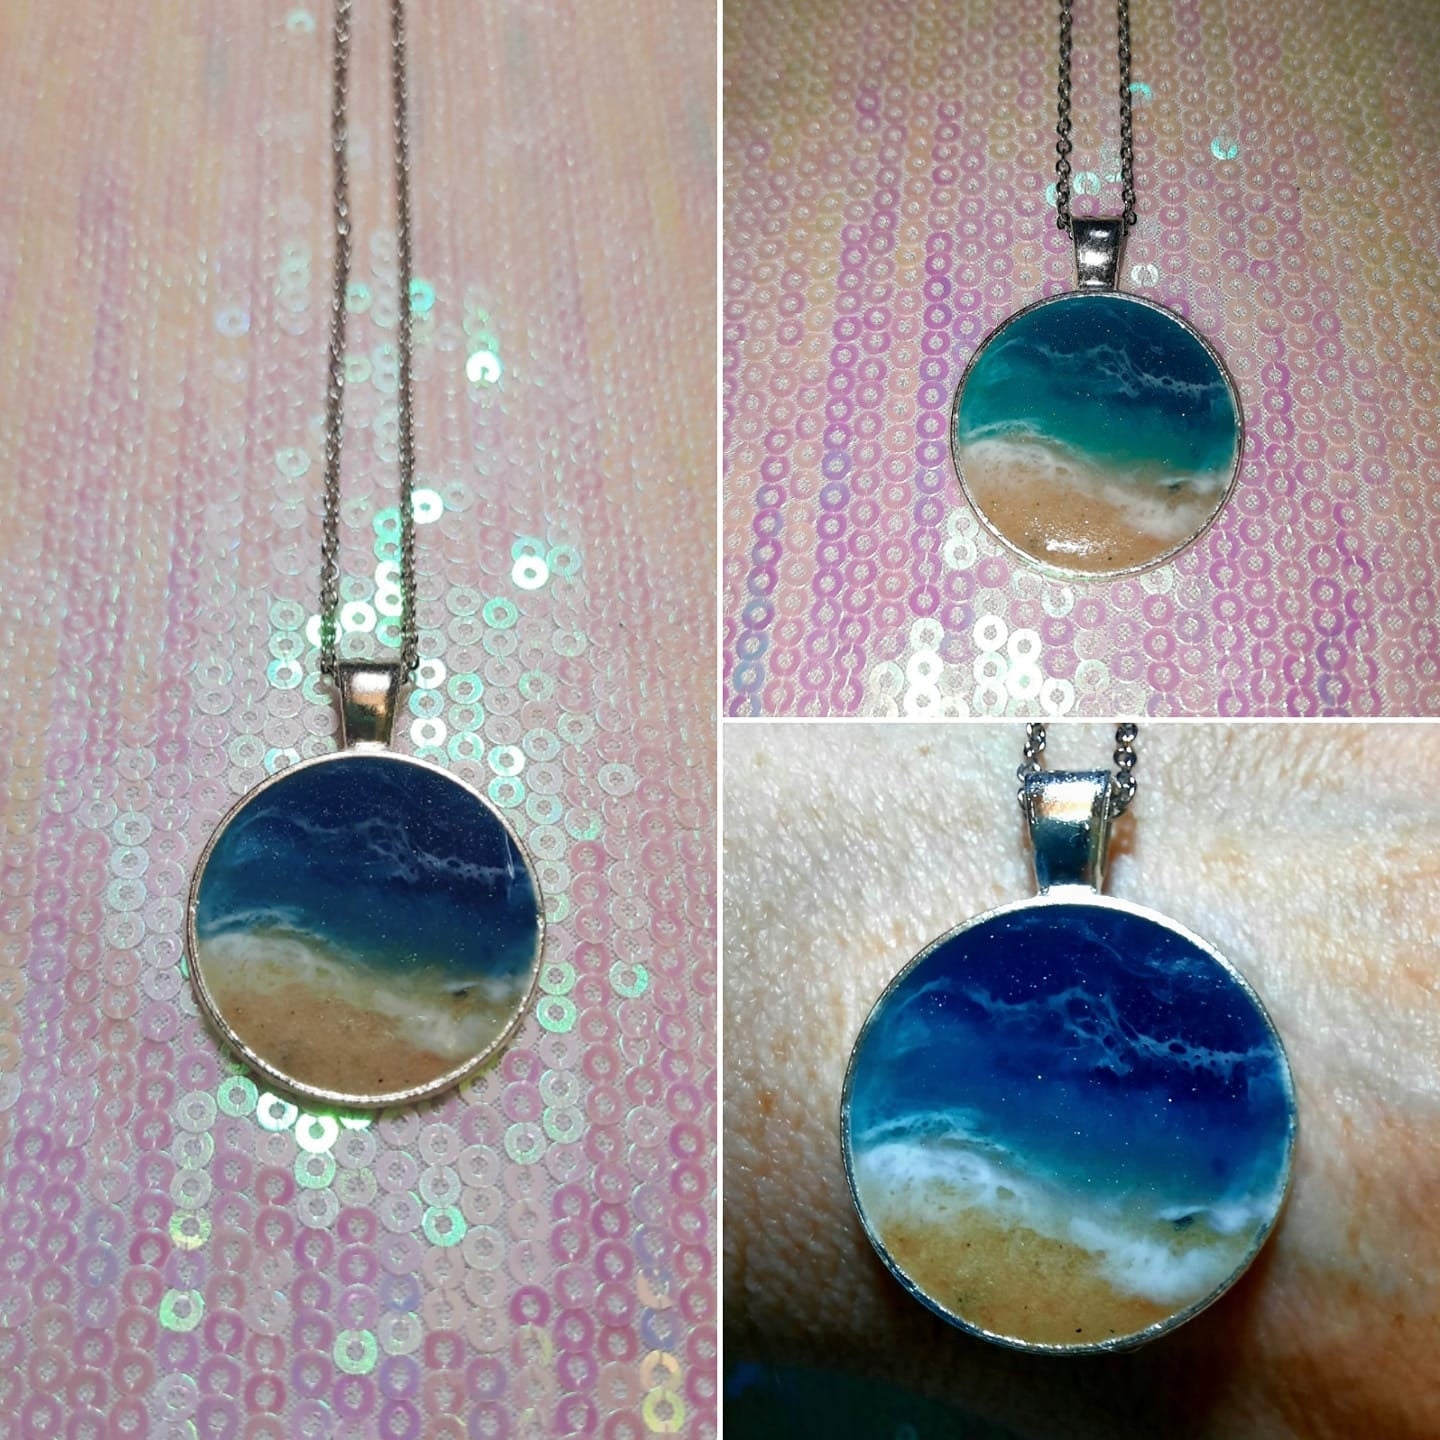 Resin Waves / Ocean Jewelry / Beach Scene Stainless Steel Necklace, Earrings, and Bangle Bracelet Set - Made with Real Sand, Resin, and Mica